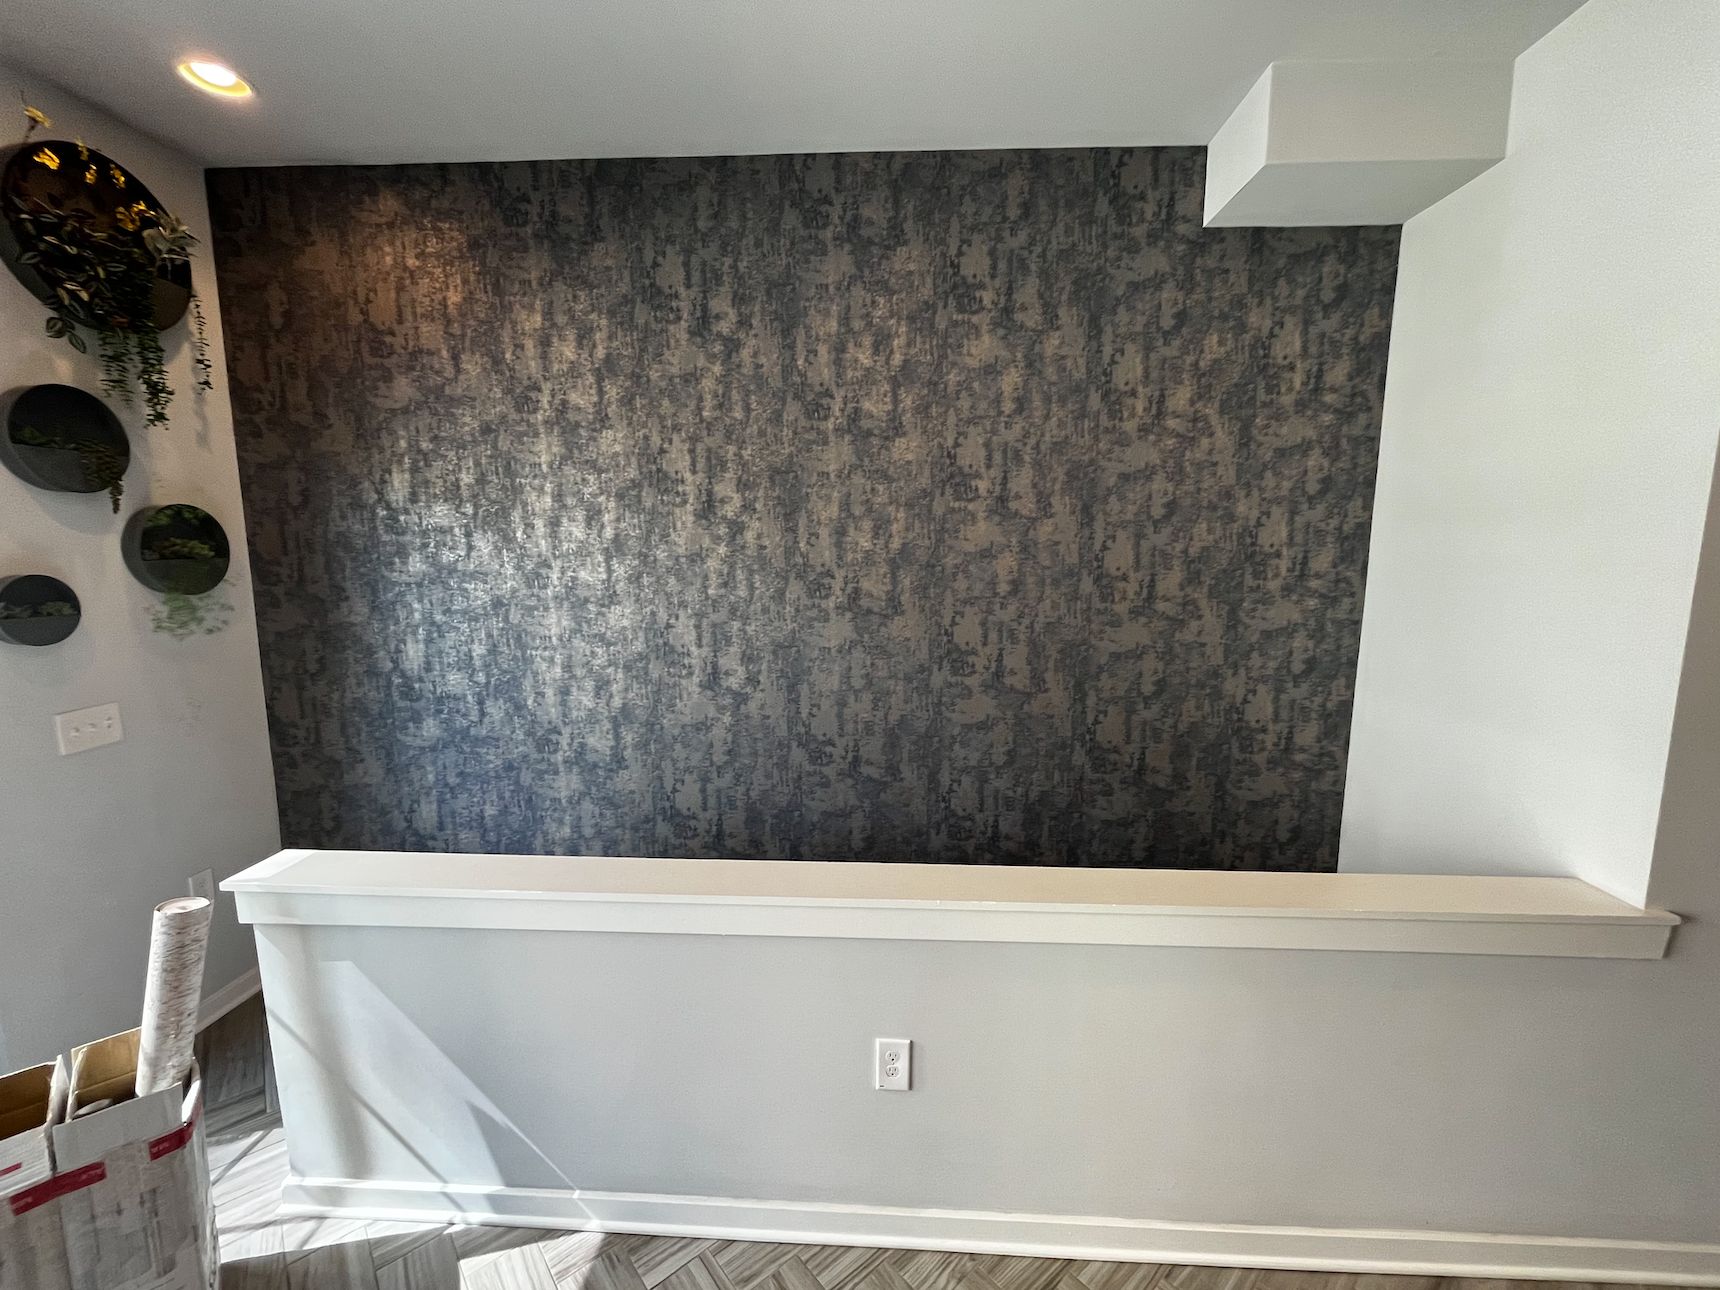 wall after wallpaper installed